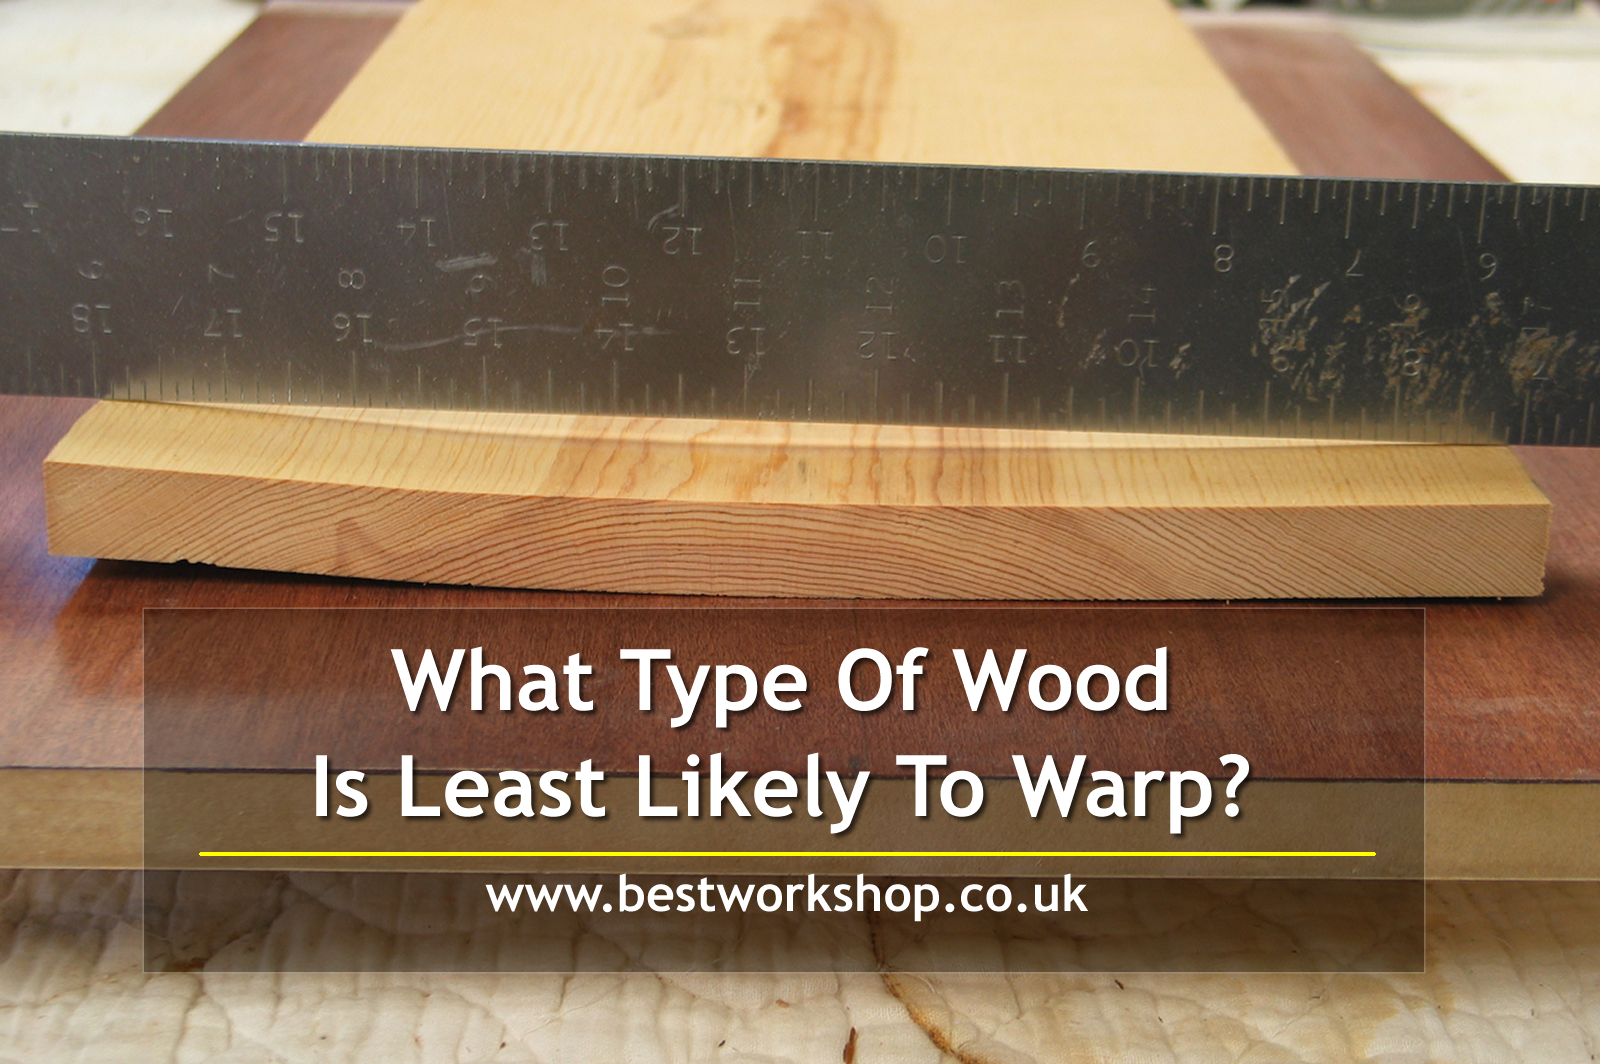 What Type Of Wood Is Least Likely To Warp?